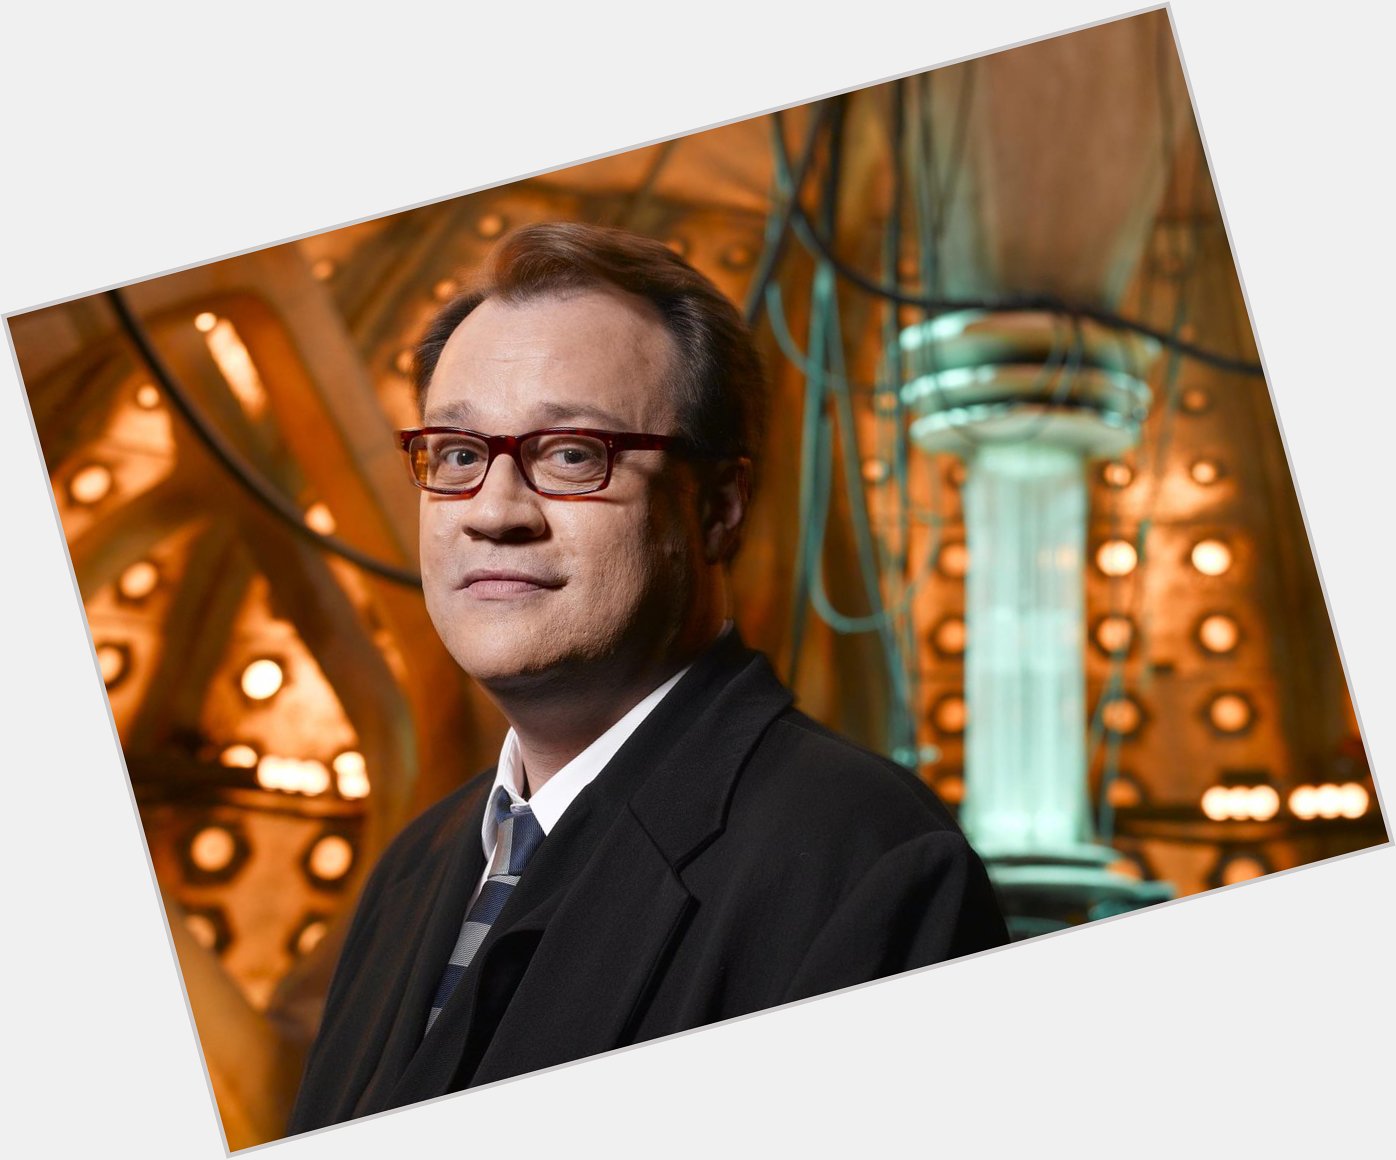 And a Happy Birthday to former showrunner Russell T. Davies! 